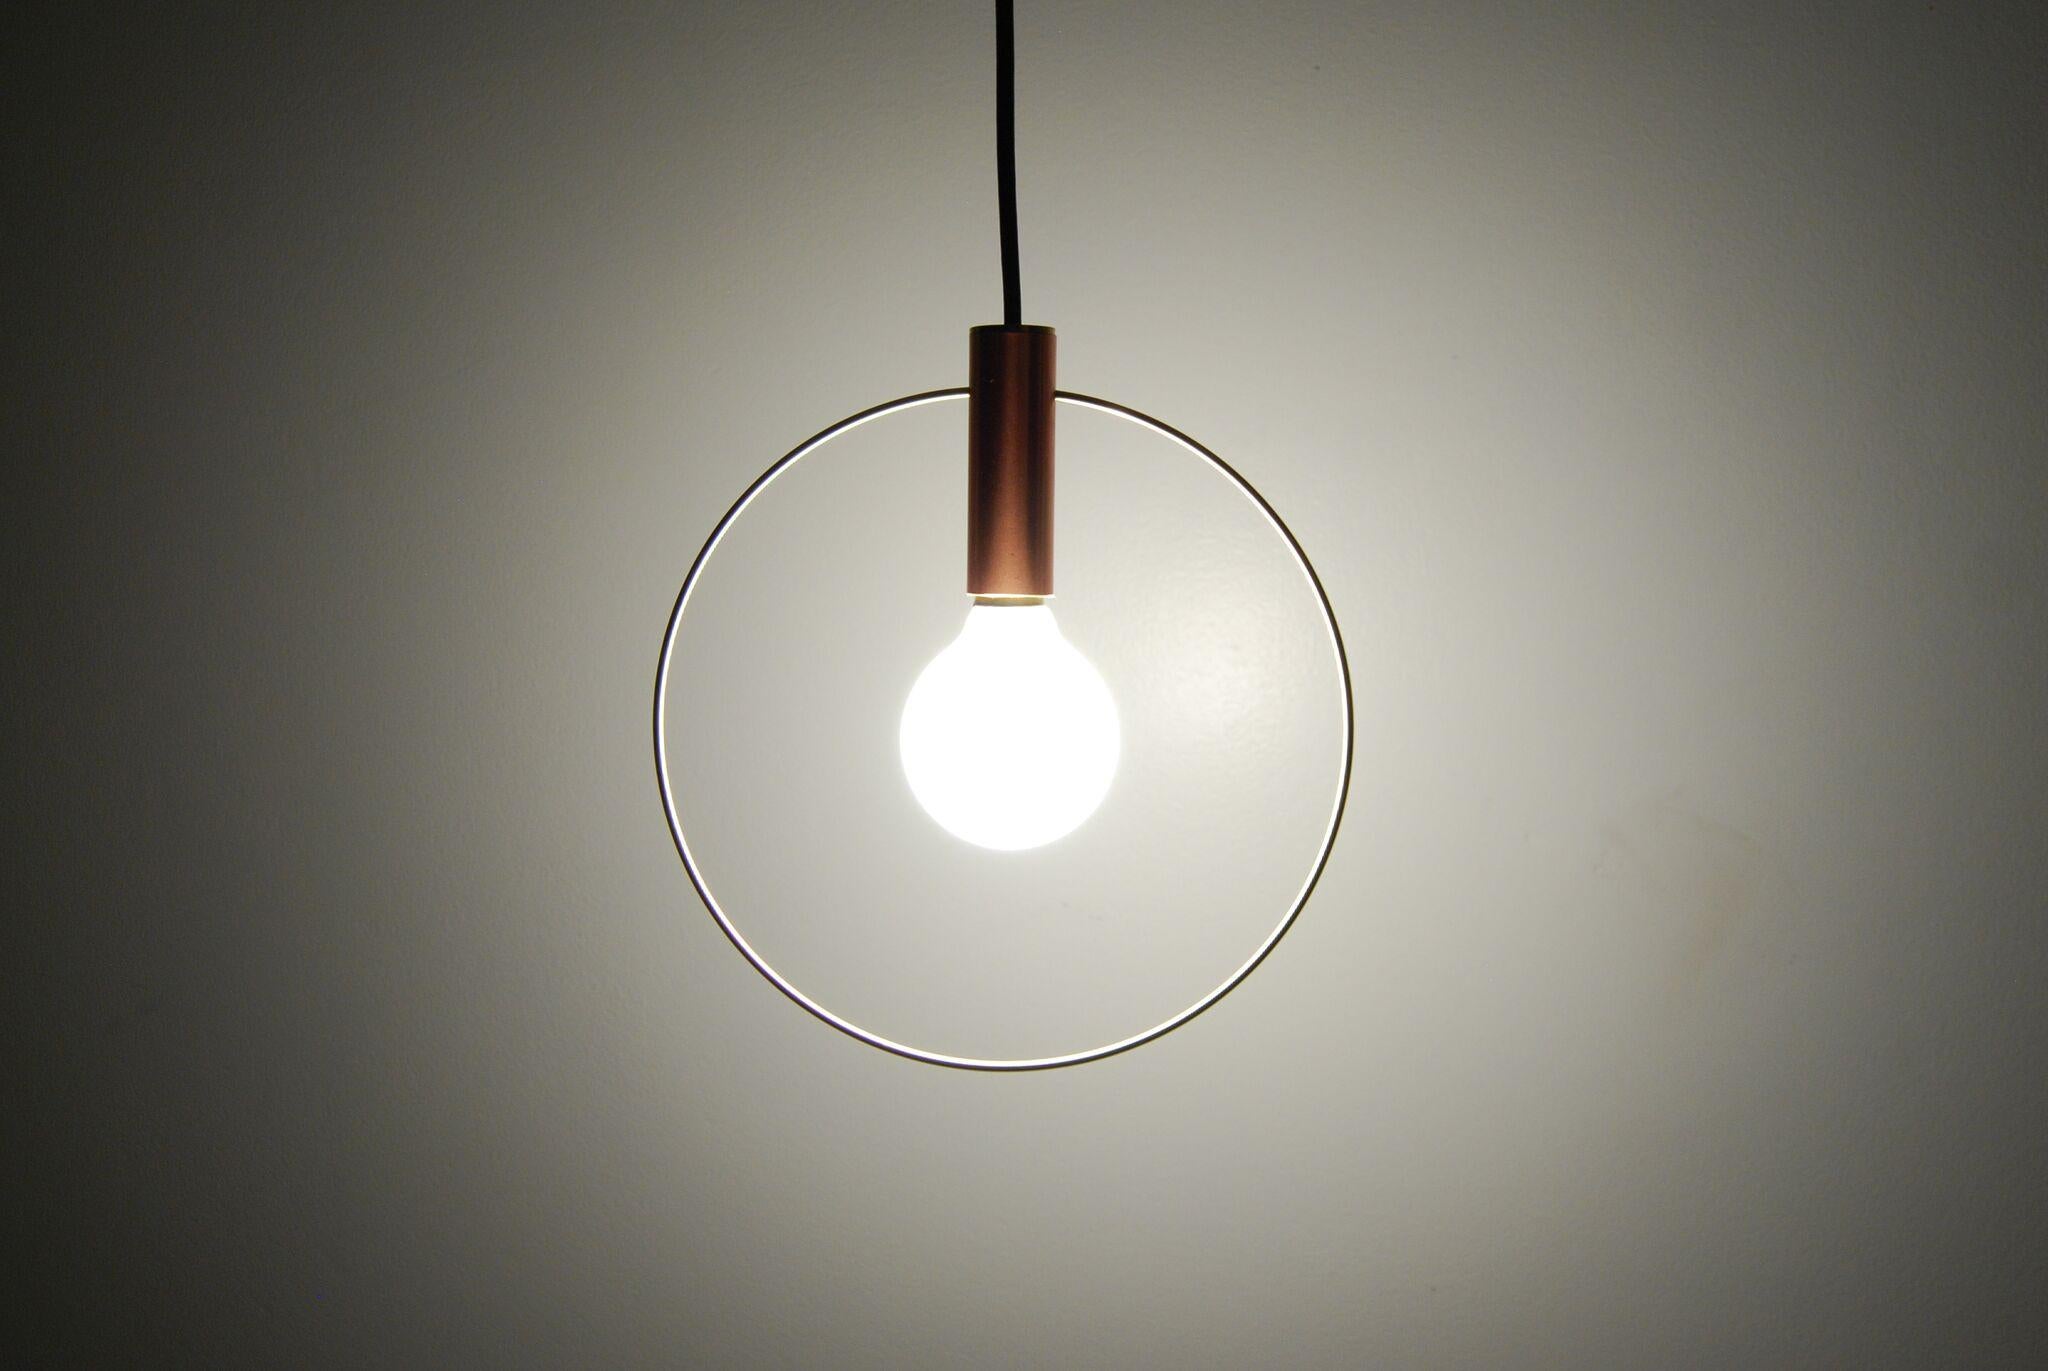 Light pared down into its two elemental ingredients: the source (the bulb) and its illumination (highlighted by a ring) The resulting Aura pendant lights are simple and versatile. Pendant can be hung individually at adjustable heights or in clusters